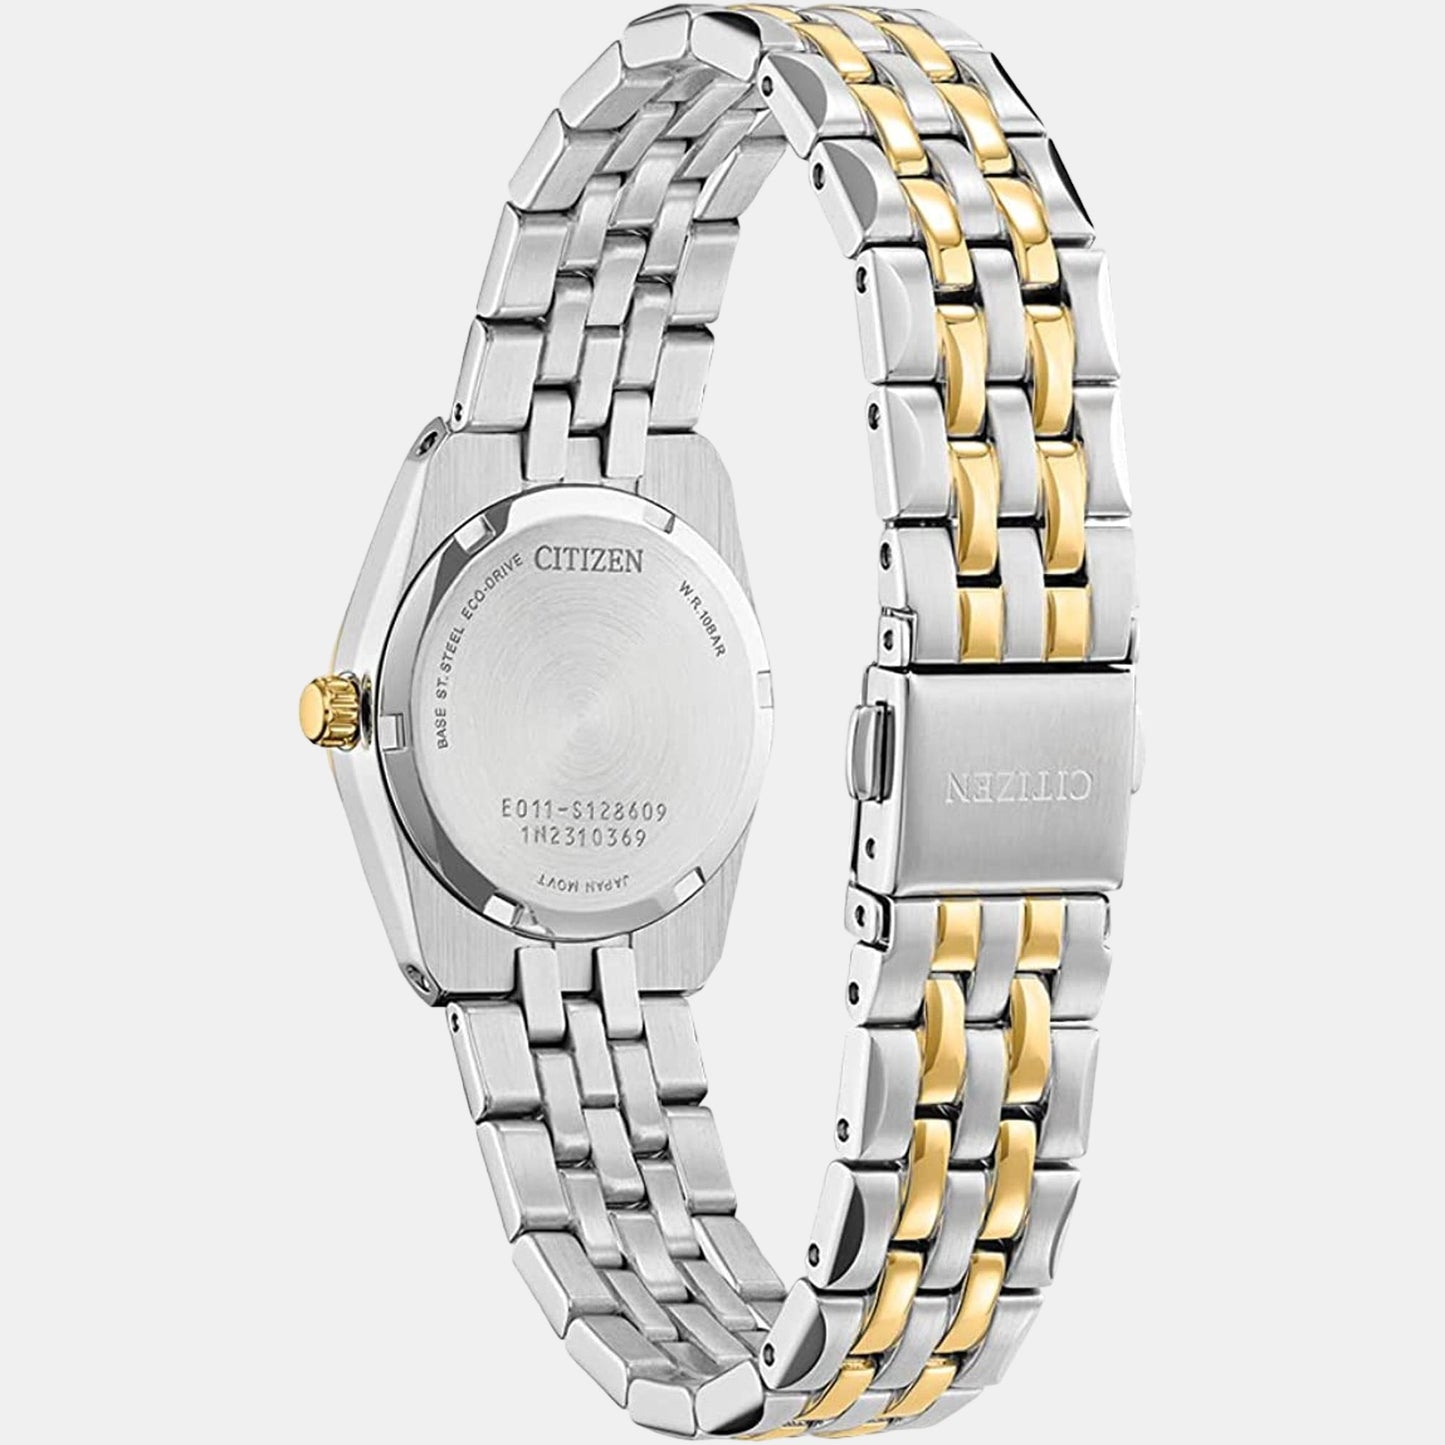 Female Analog Stainless Steel Eco-Drive Watch EW2299-50A